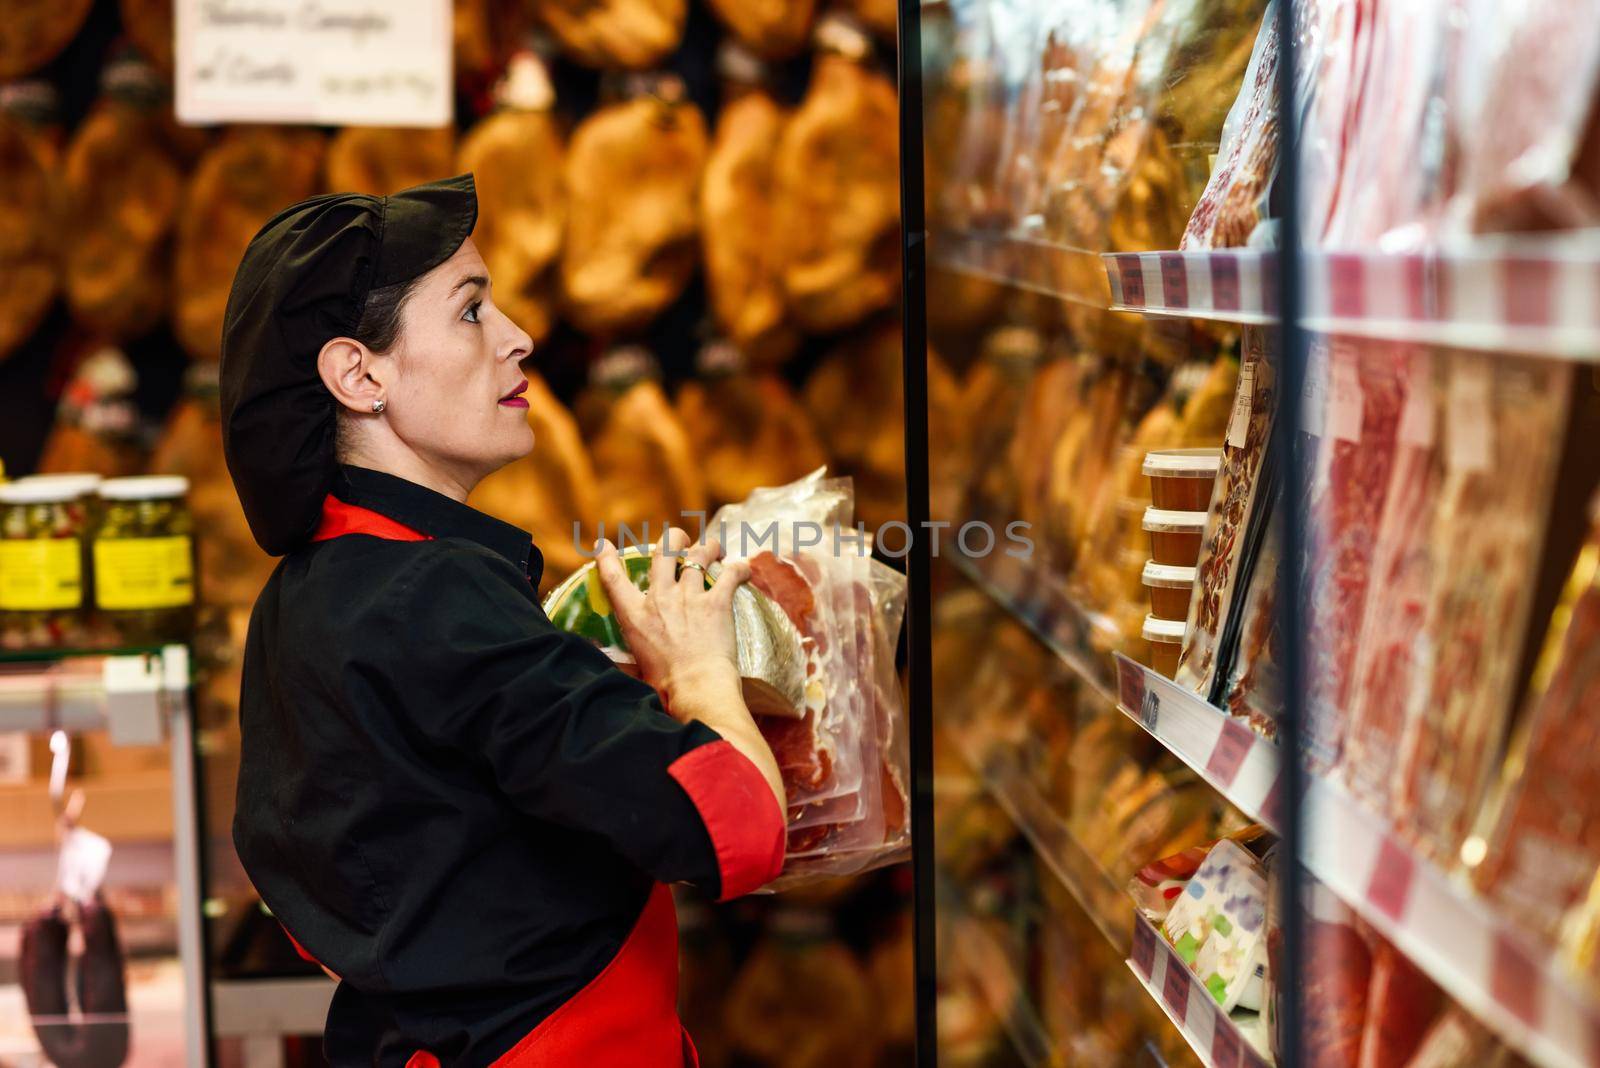 Portrait of female worker taking products in butcher shop. Refrigerated display case for sausage packages, ham and cheese